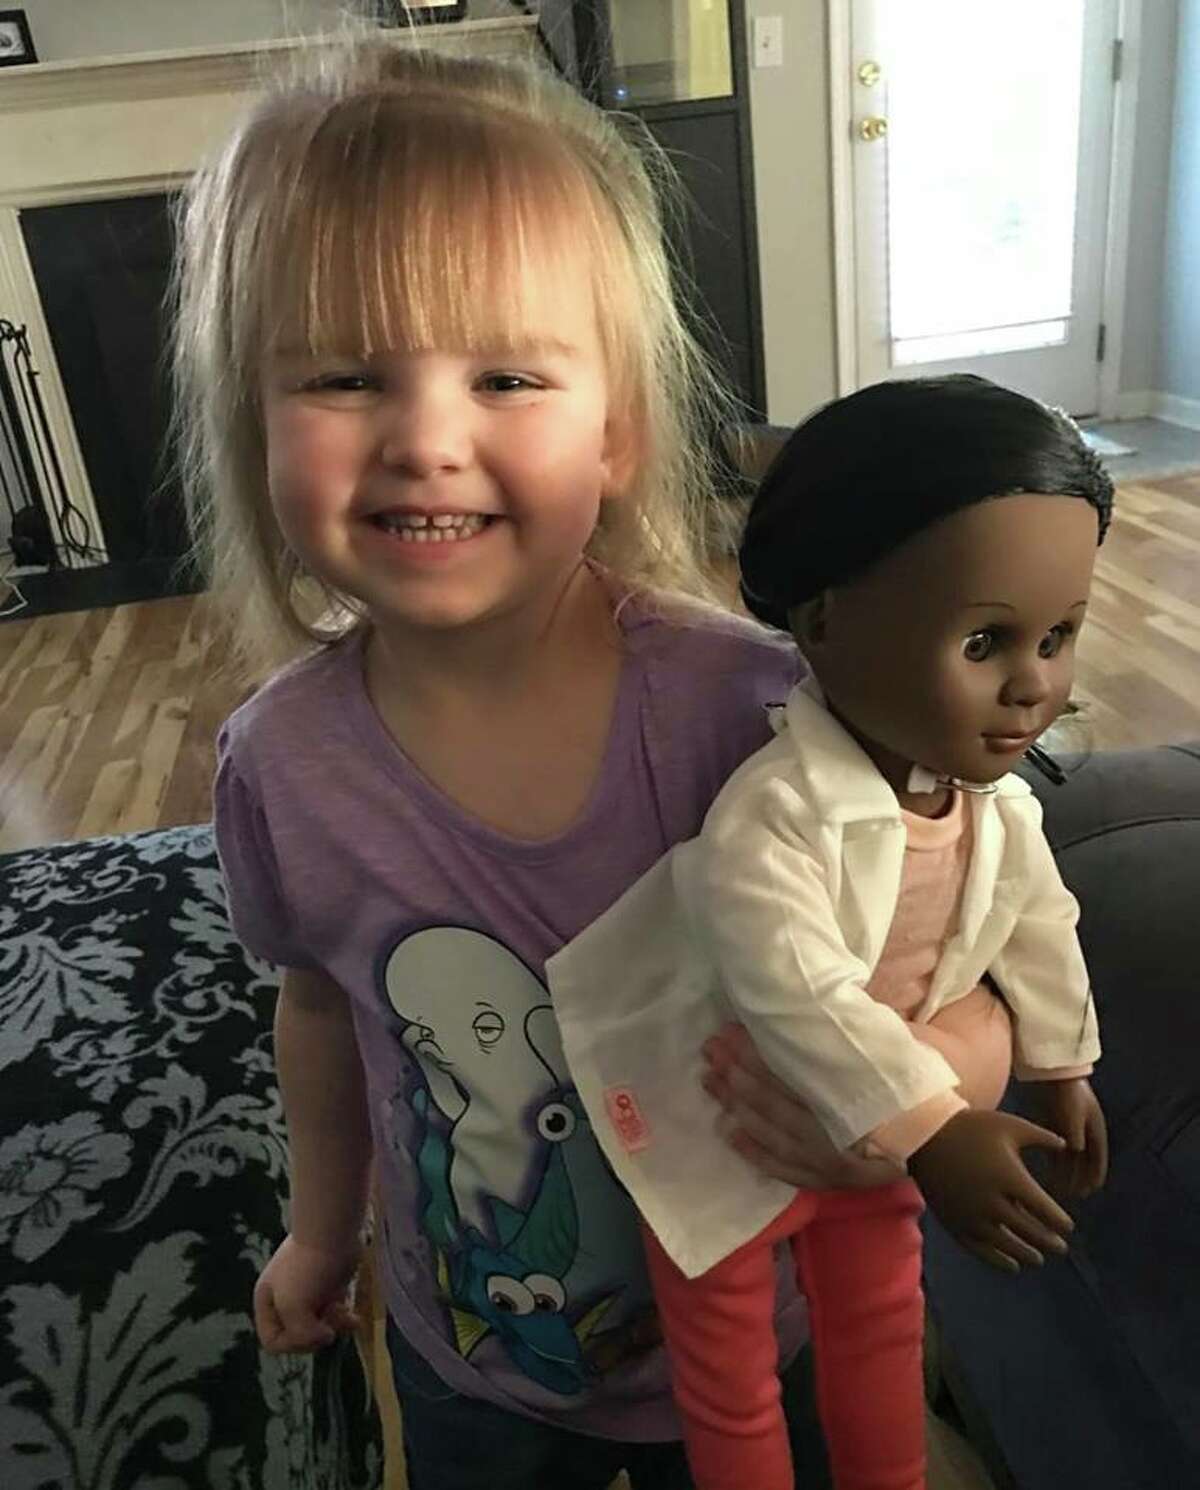 A Young Girl Picks Her Doll Based On Profession Not Skin Color 4526